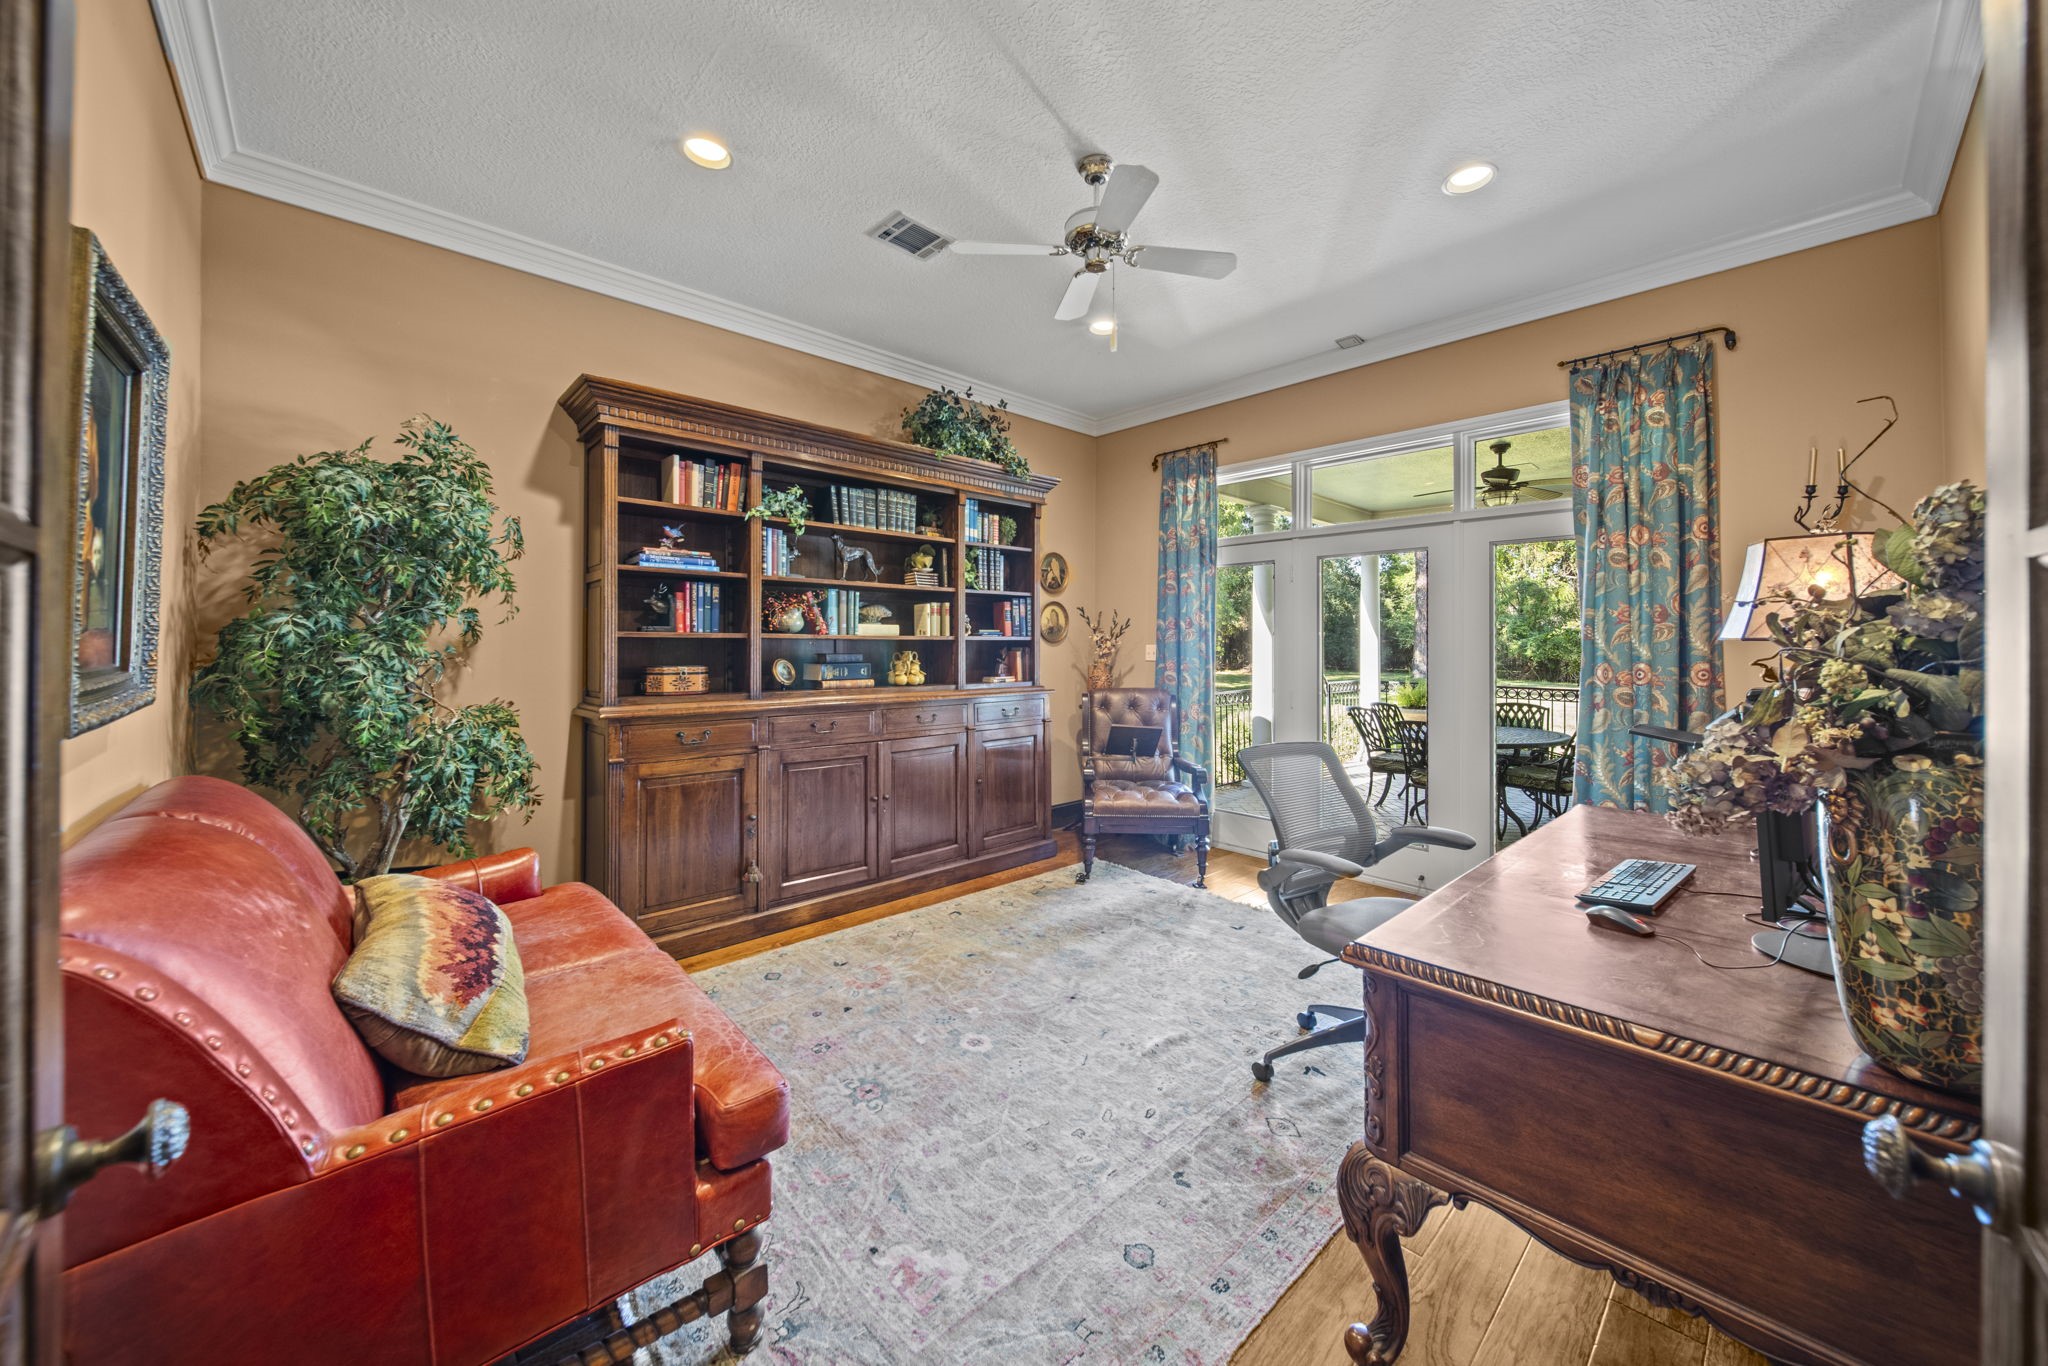 Work from home in this spacious Home office/Study. Doors lead to the exterior back covered patio.